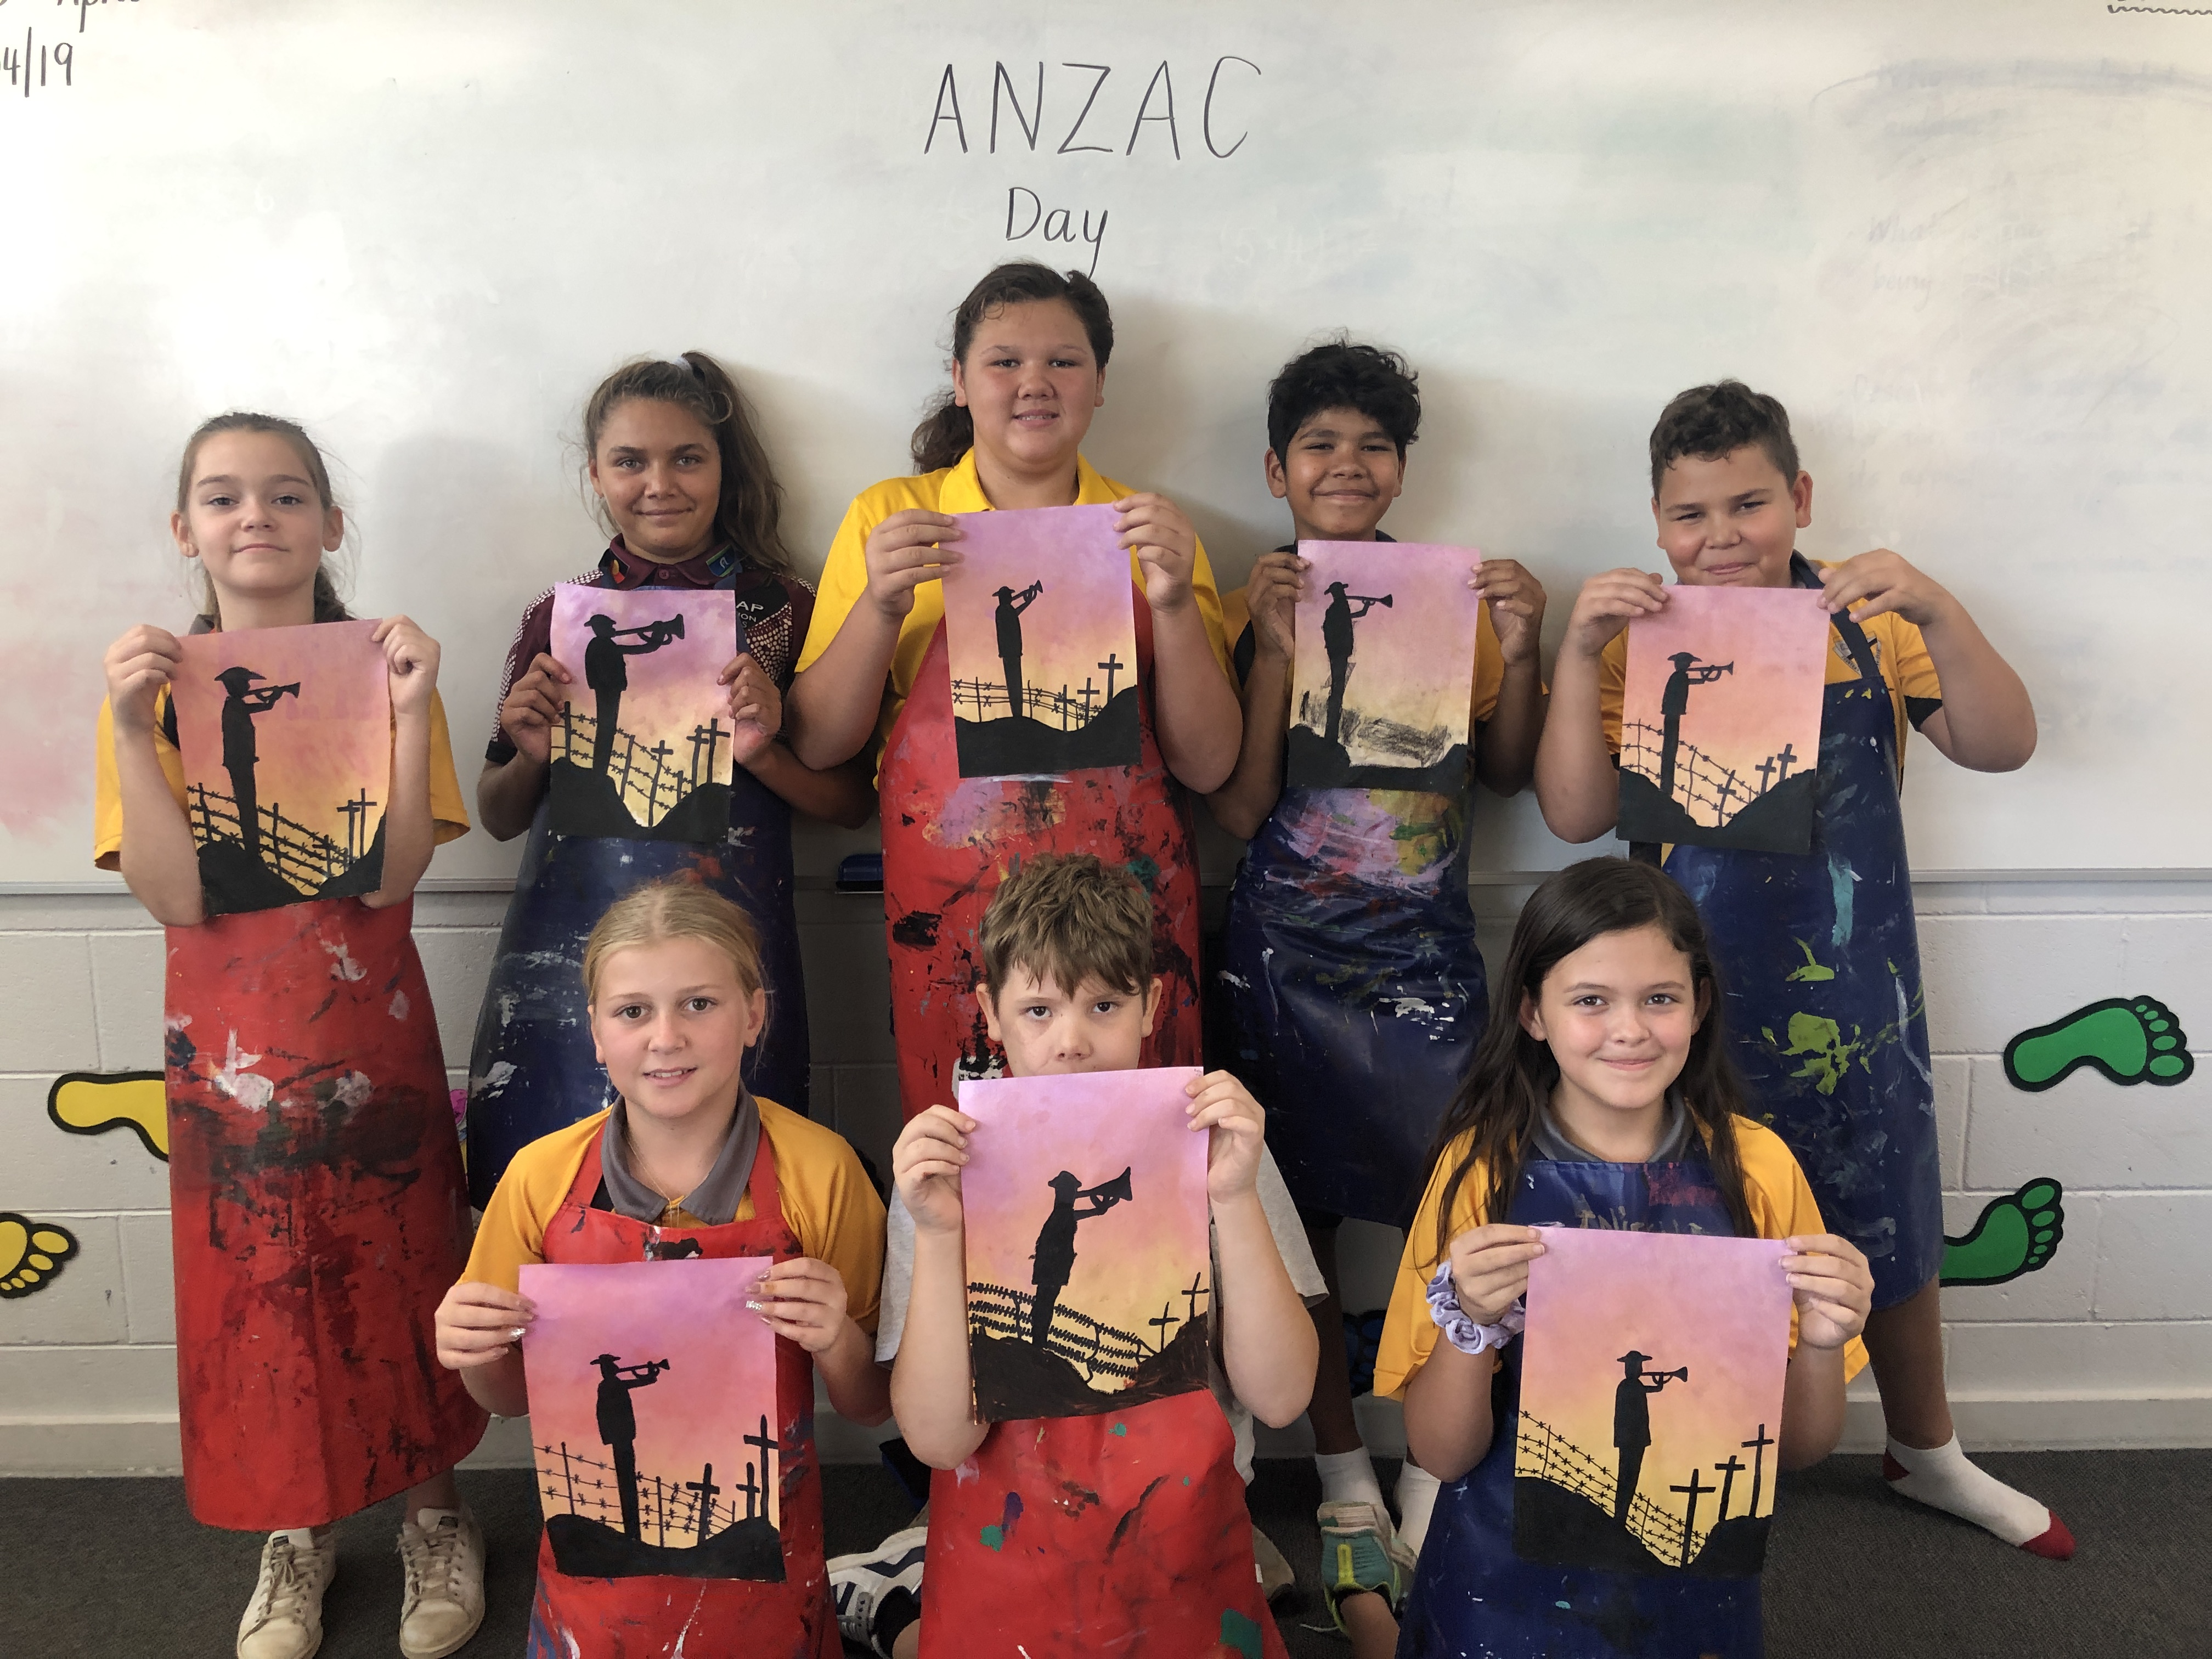 Students holding up artwork they created for ANZAC Day